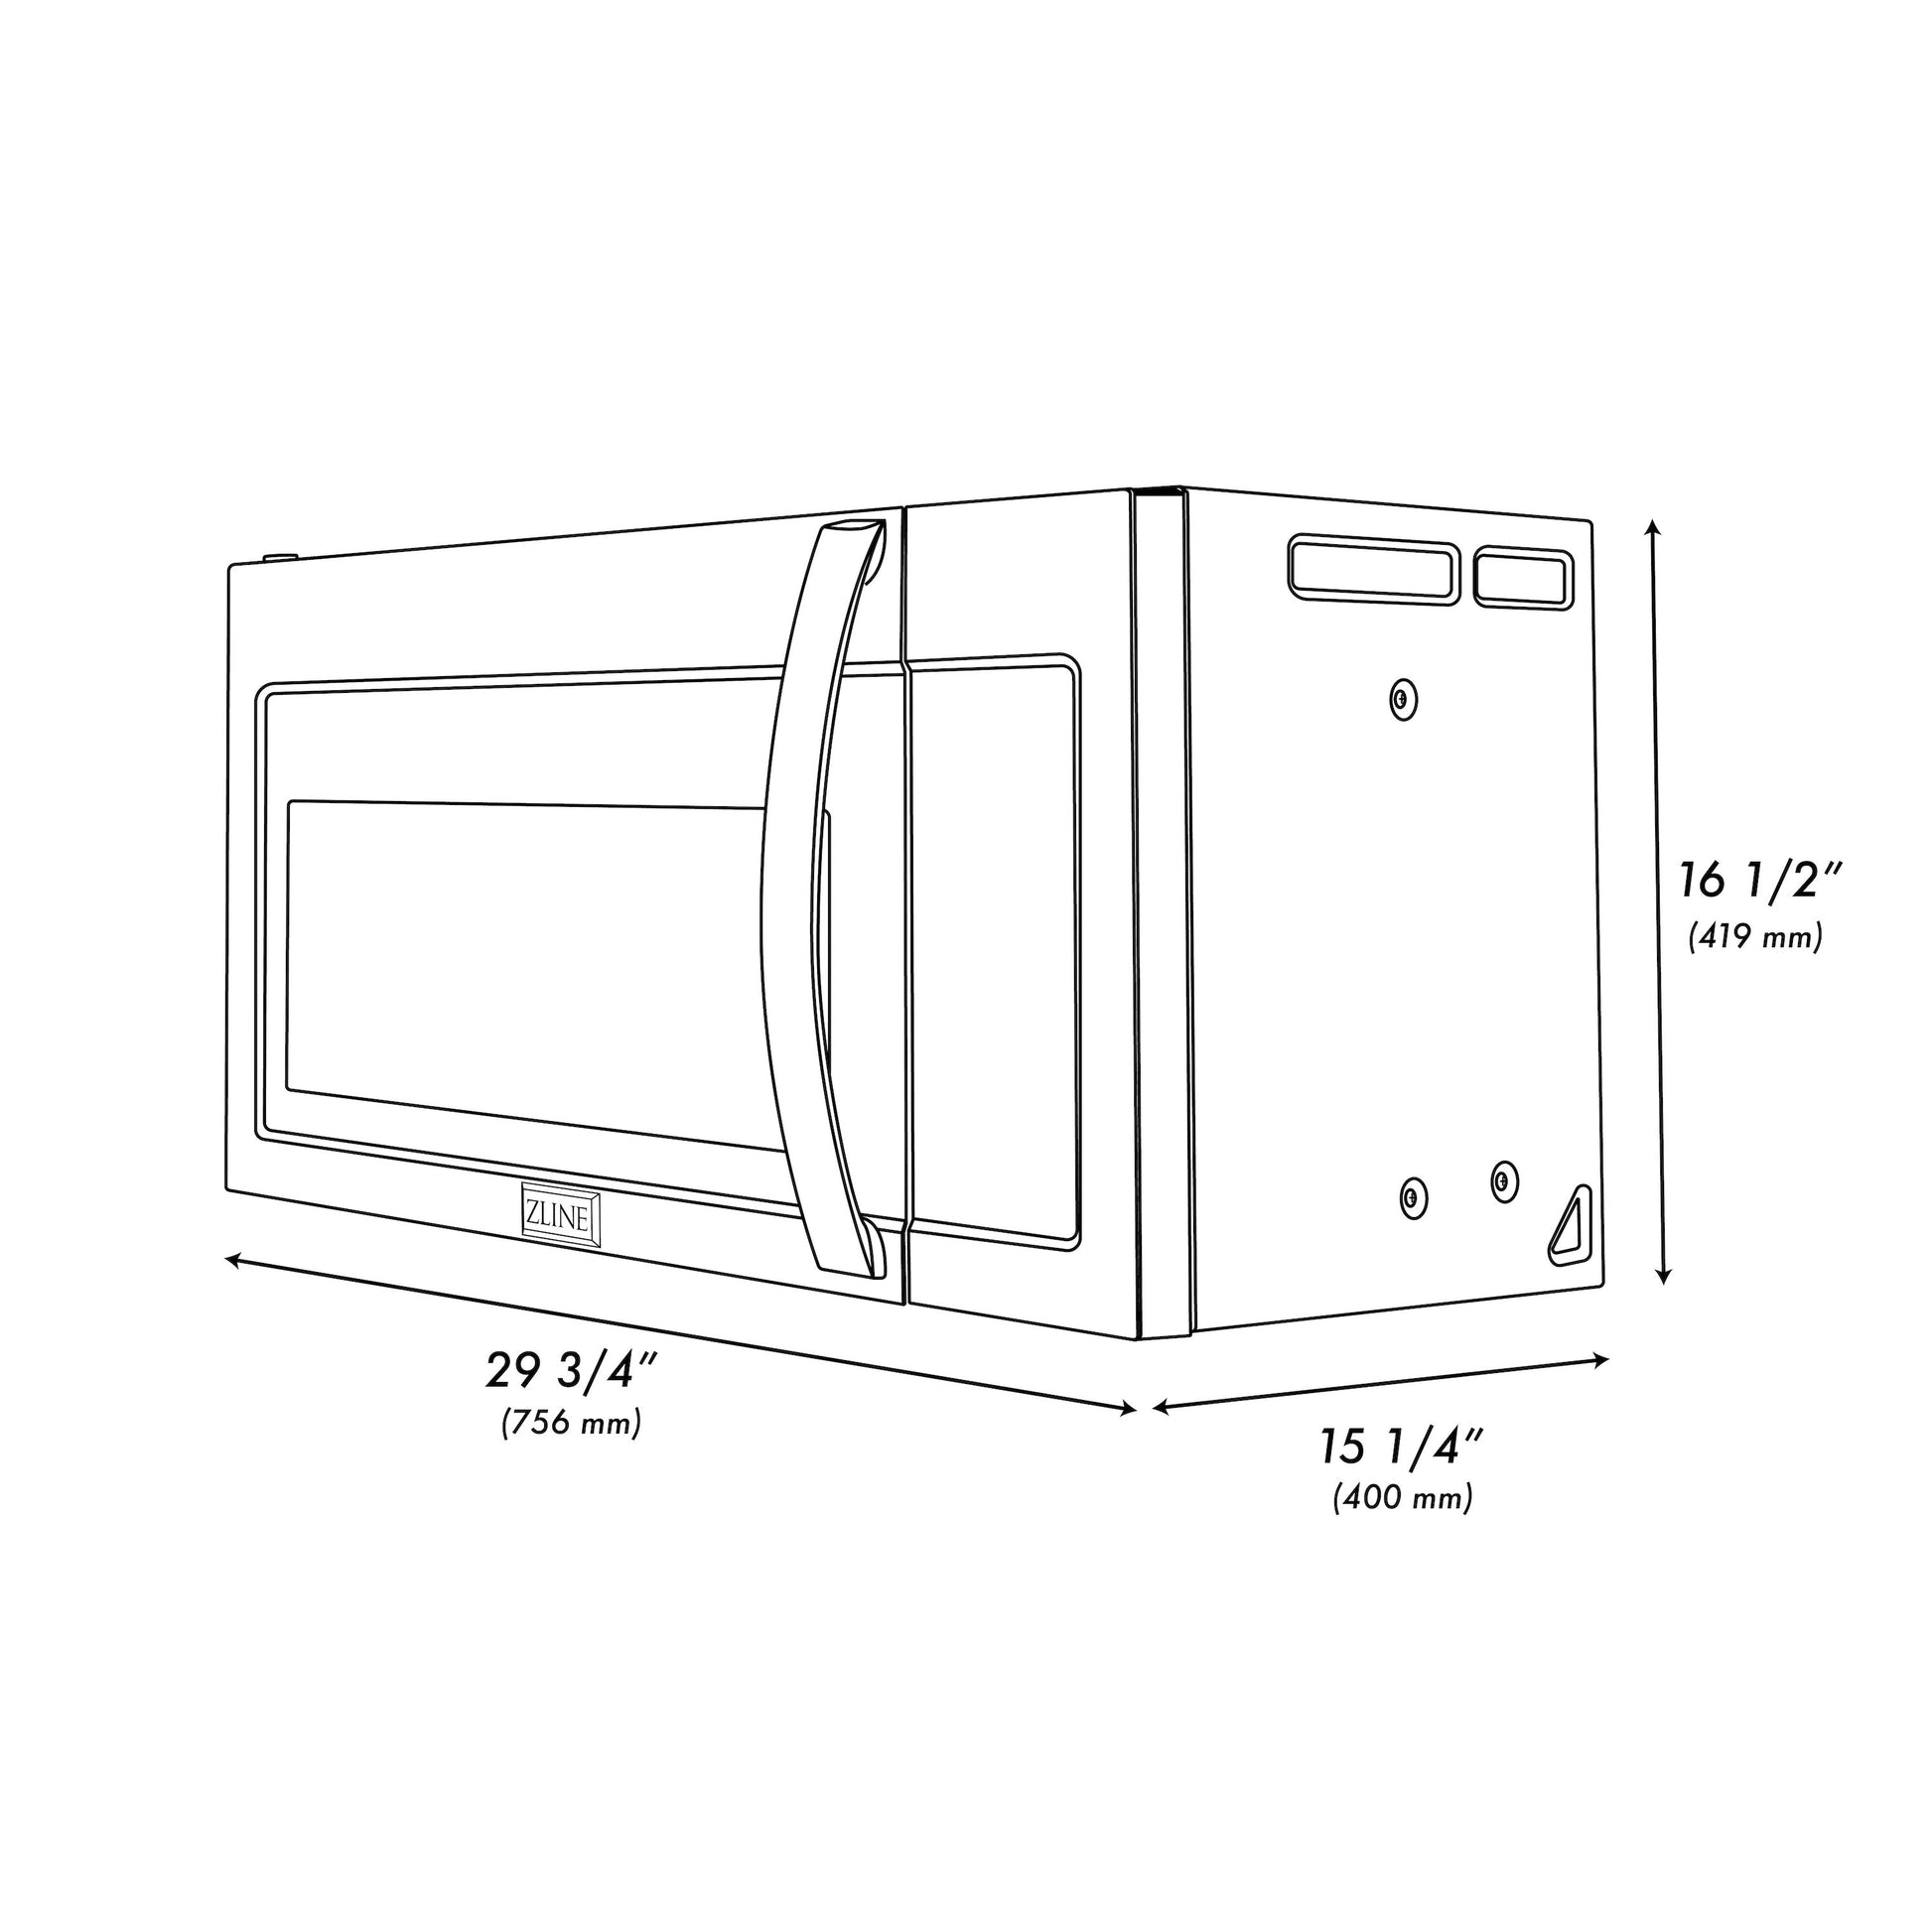 ZLINE Stainless Steel Over the Range Convection Microwave Oven with Modern Handle (MWO-OTR-30) dimensional diagram with measurements.